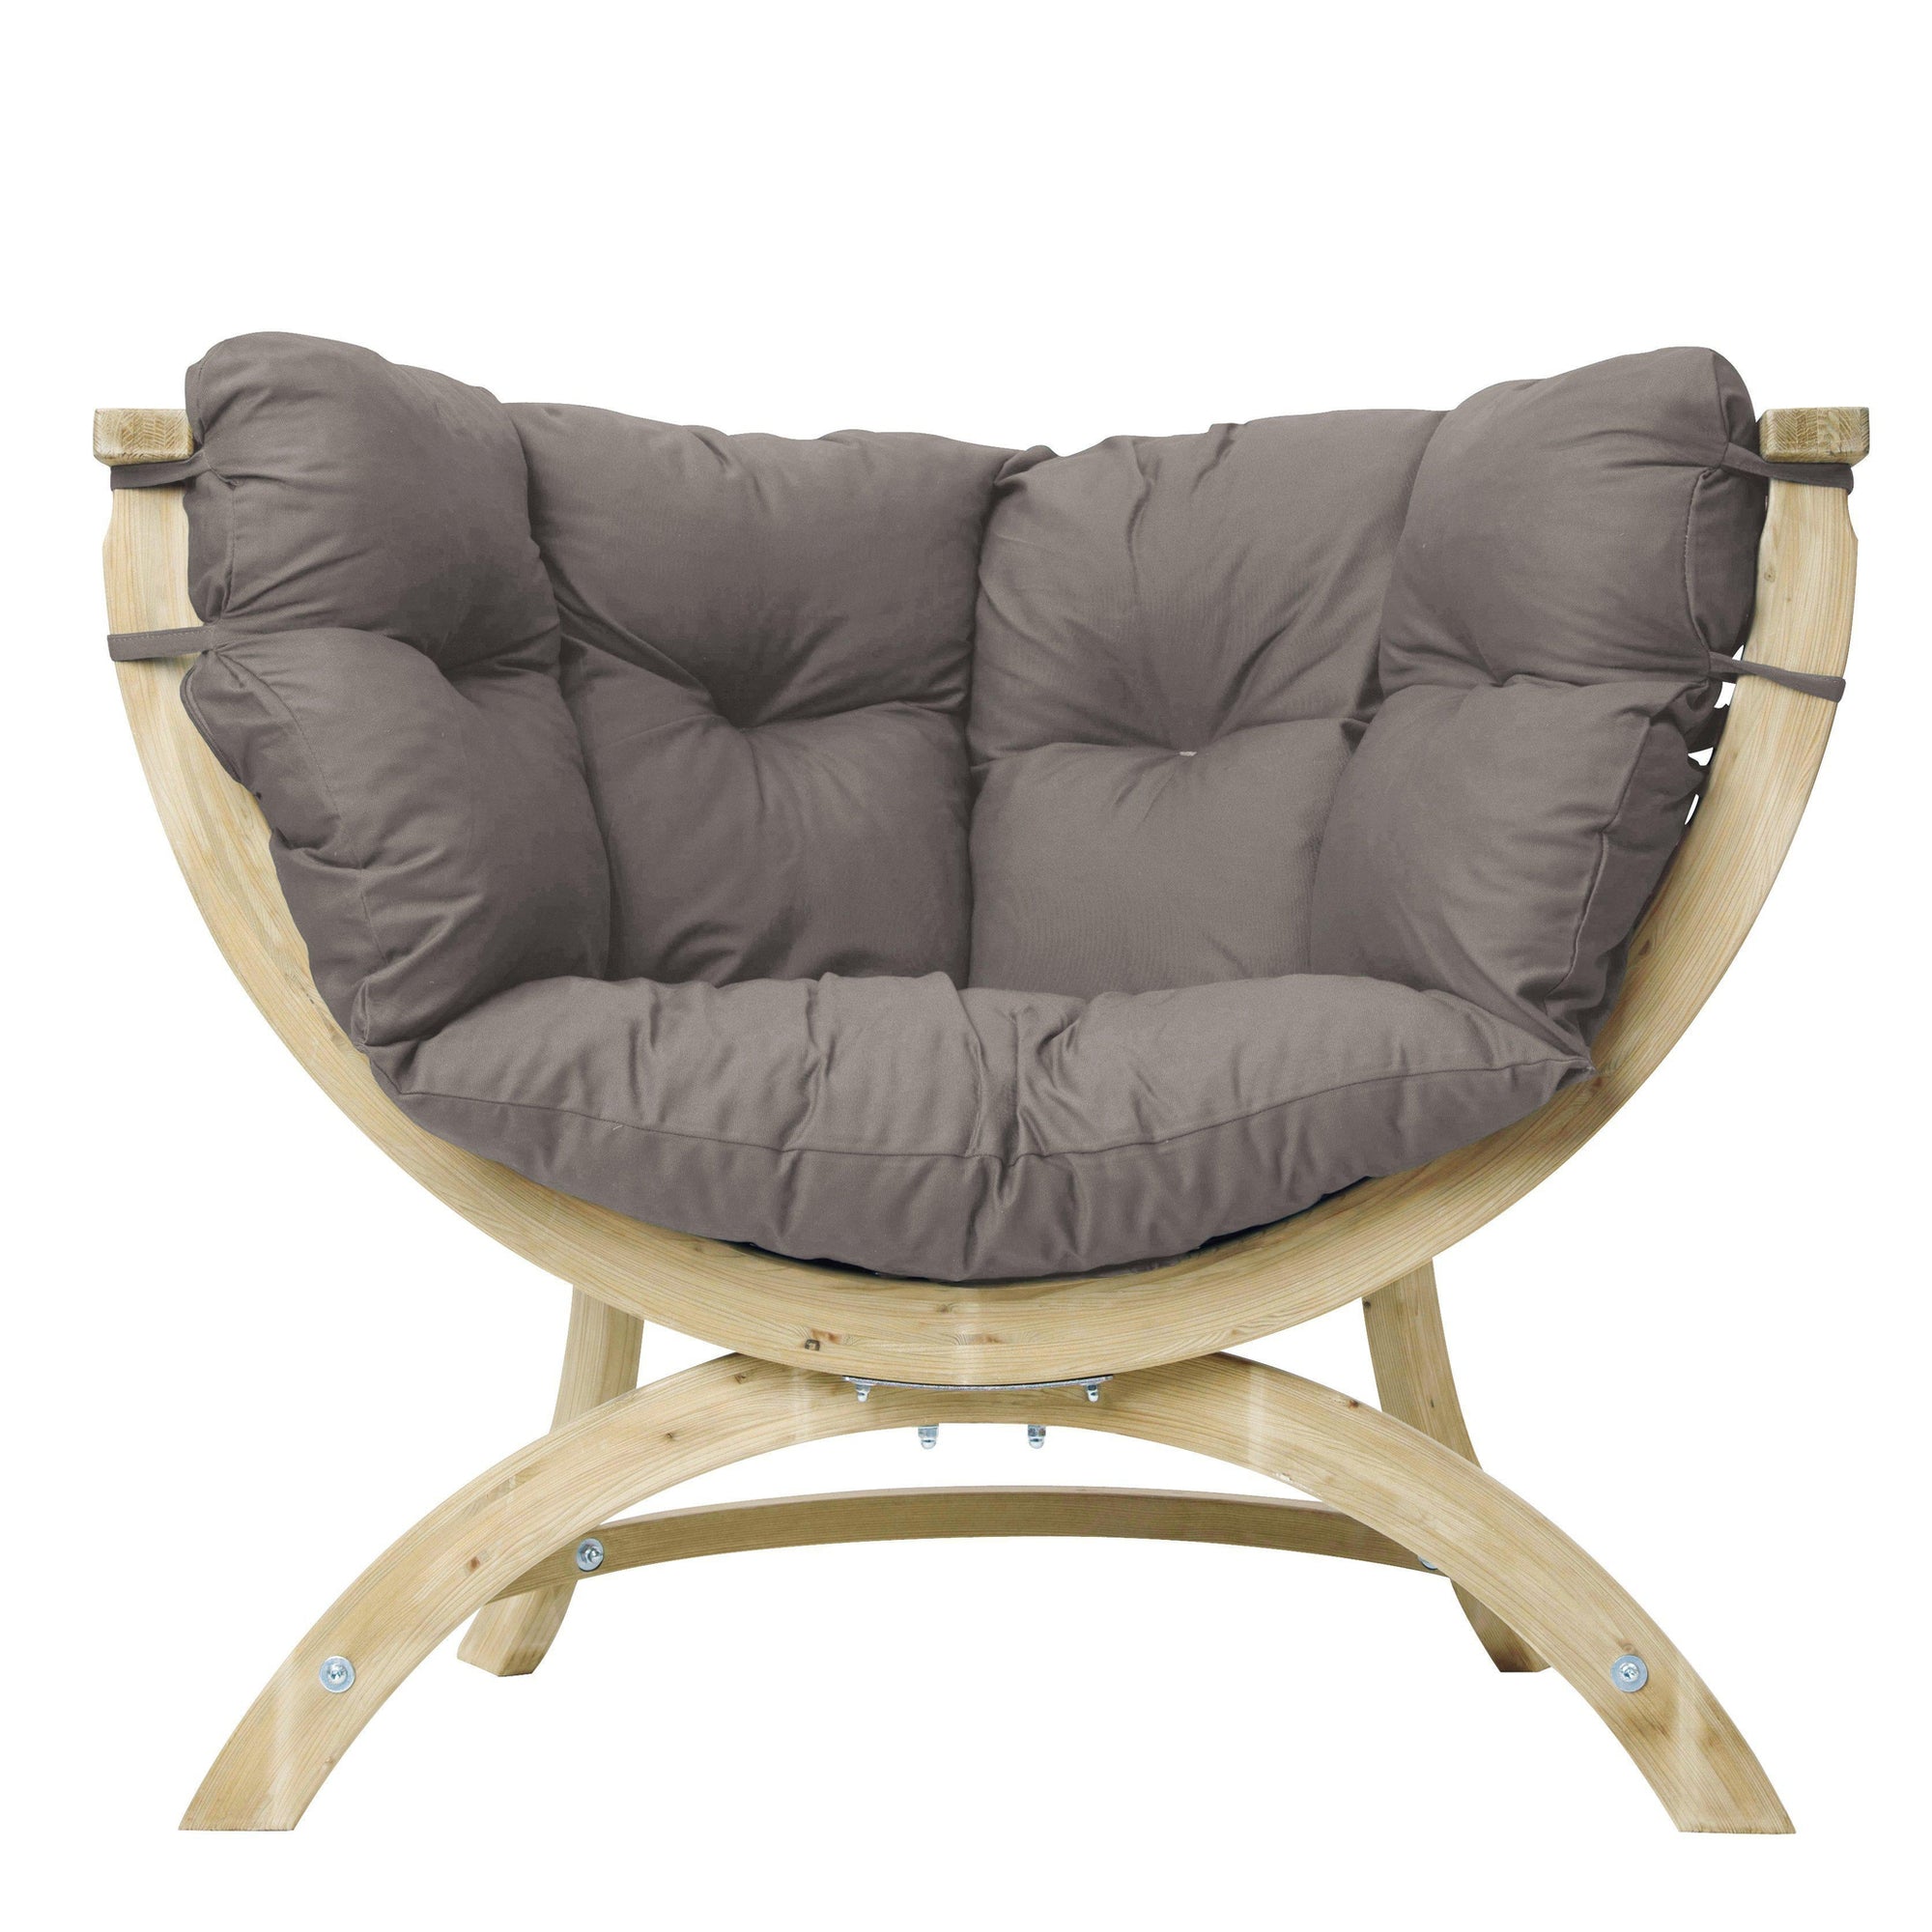 Siena UNO Chair, Taupe, from Byer of Maine